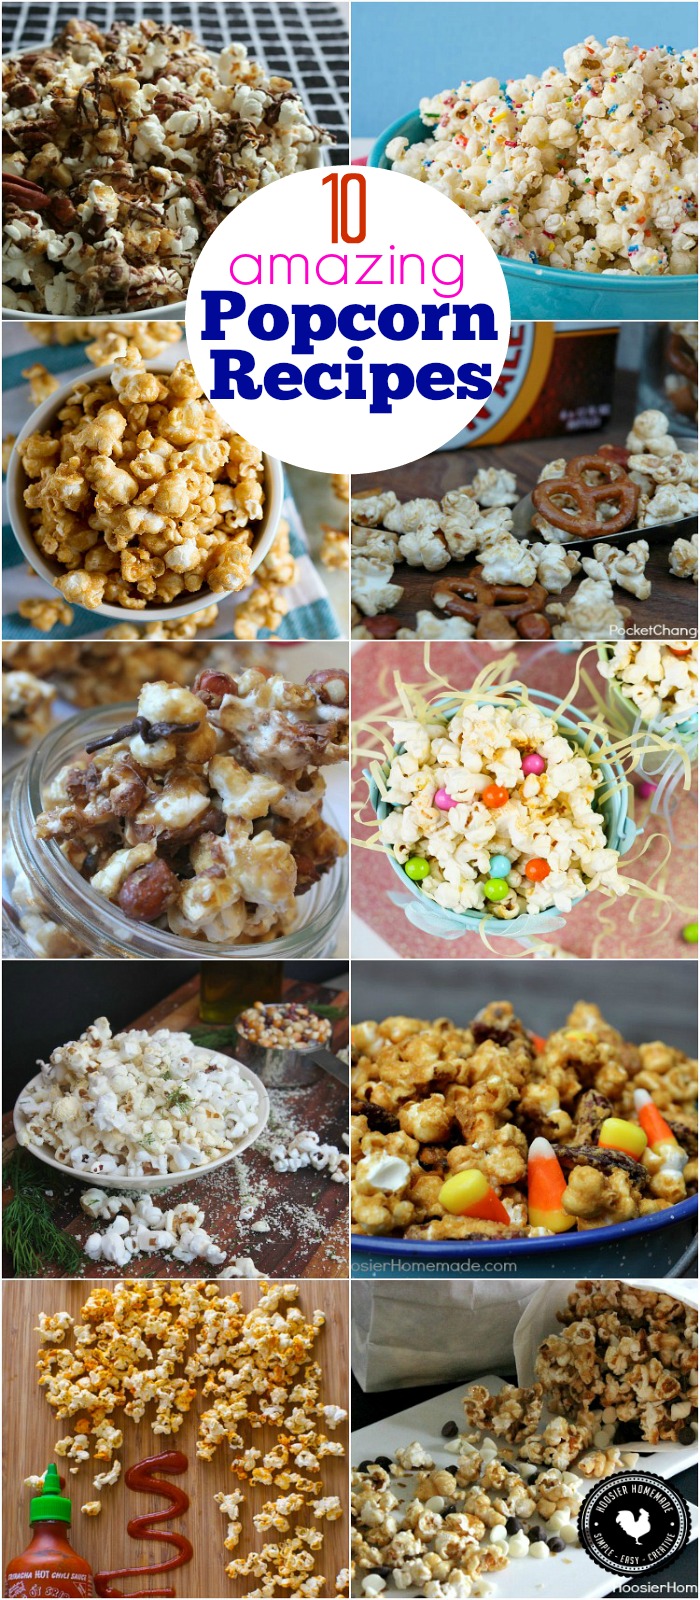 Who doesn't LOVE popcorn? It's the perfect snack any time of day! These 10 amazing Popcorn Recipes are sure to please even the pickiest snacker! Be sure to save the recipes by pinning to your Recipe Board!